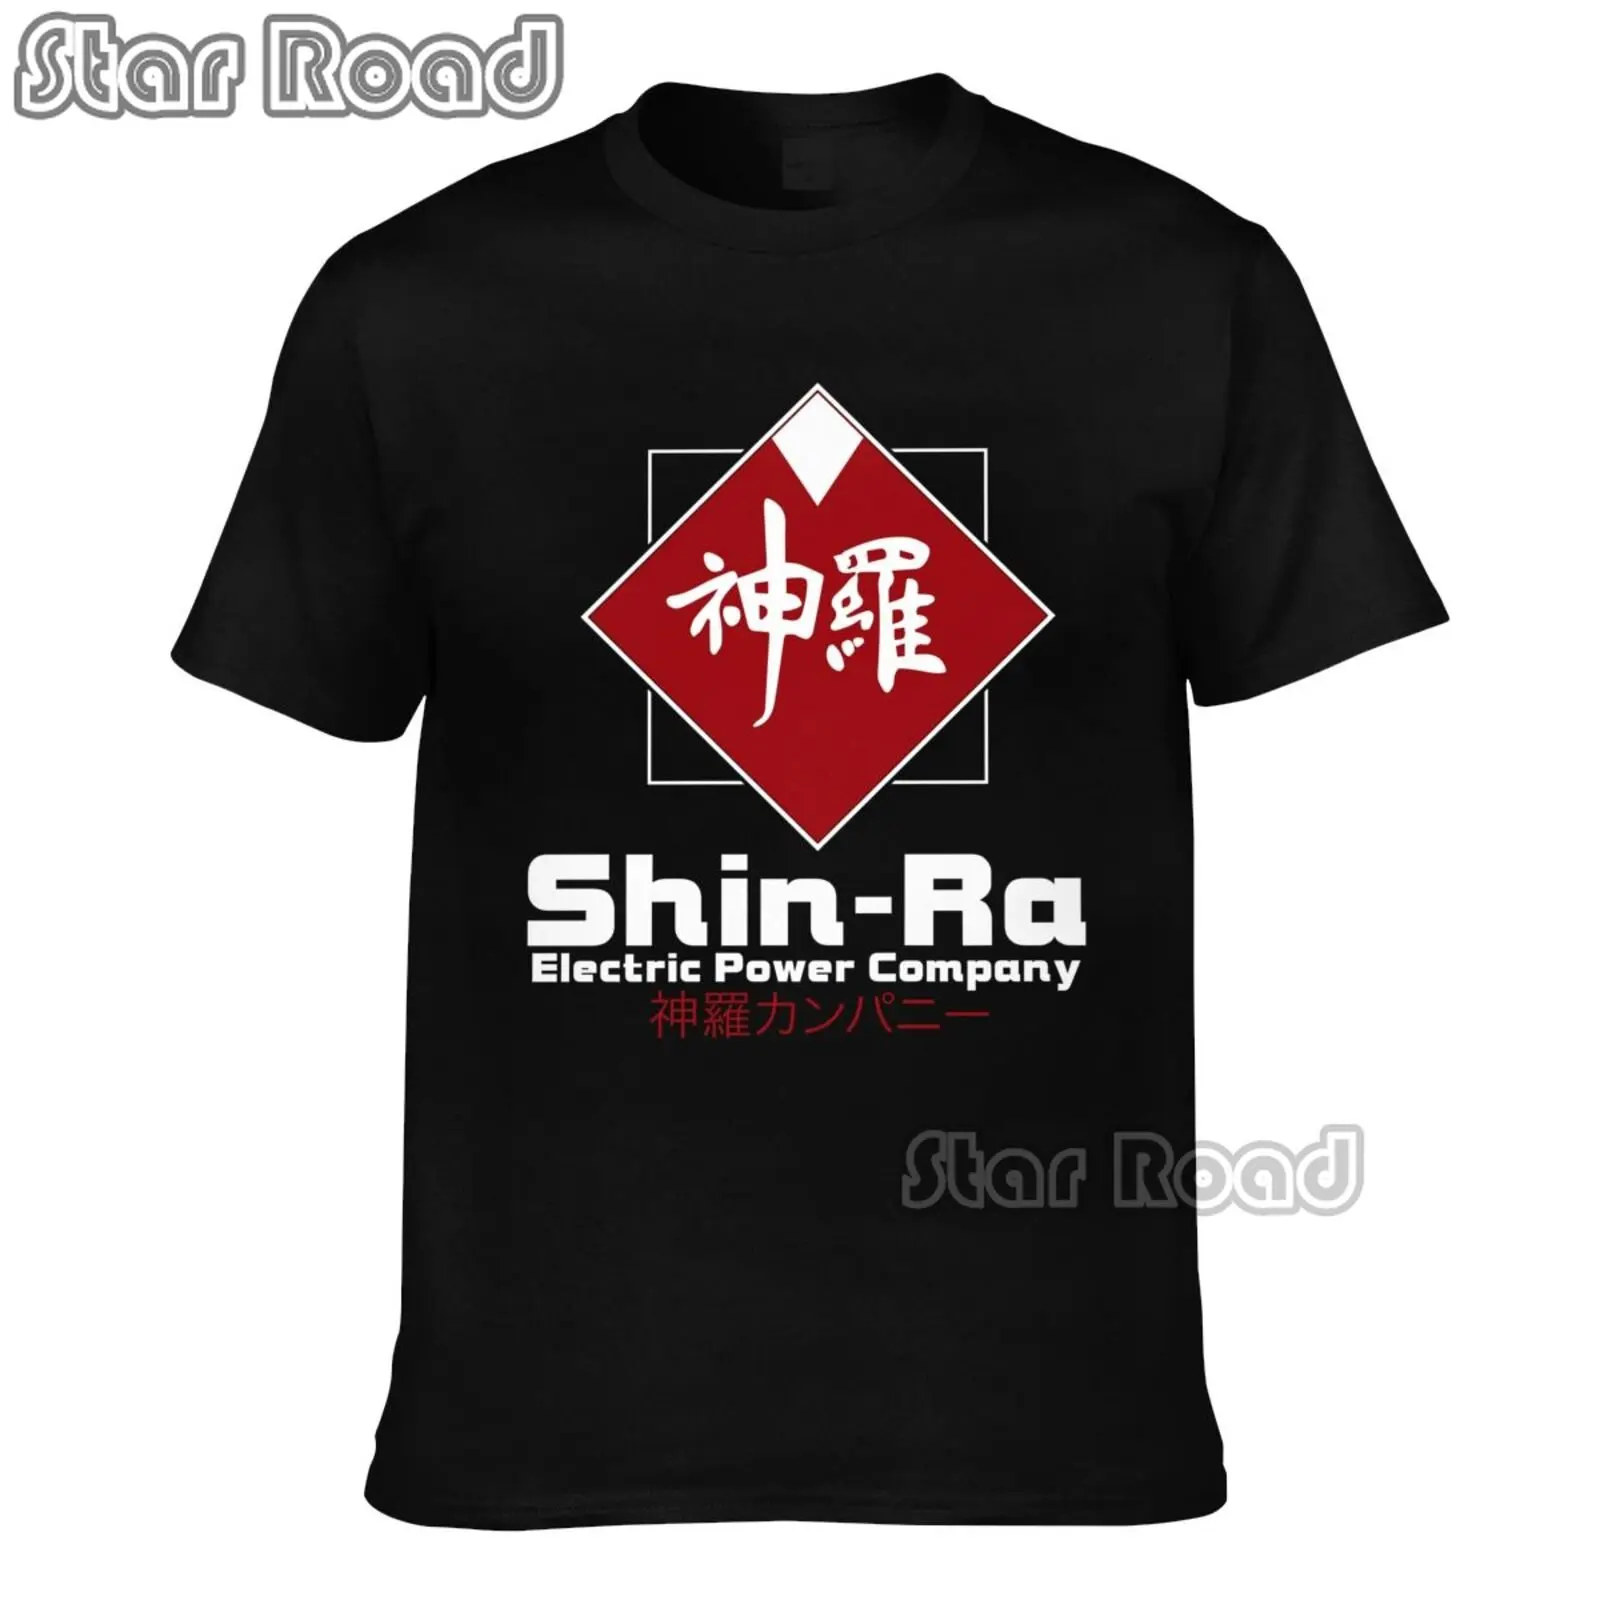 

2023 New Men's T-Shirts Final Fantasy Vintage Pure Cotton Tees Short Sleeve Cloud FF7 Video Game Strife Shinra Chocobo T Shirts